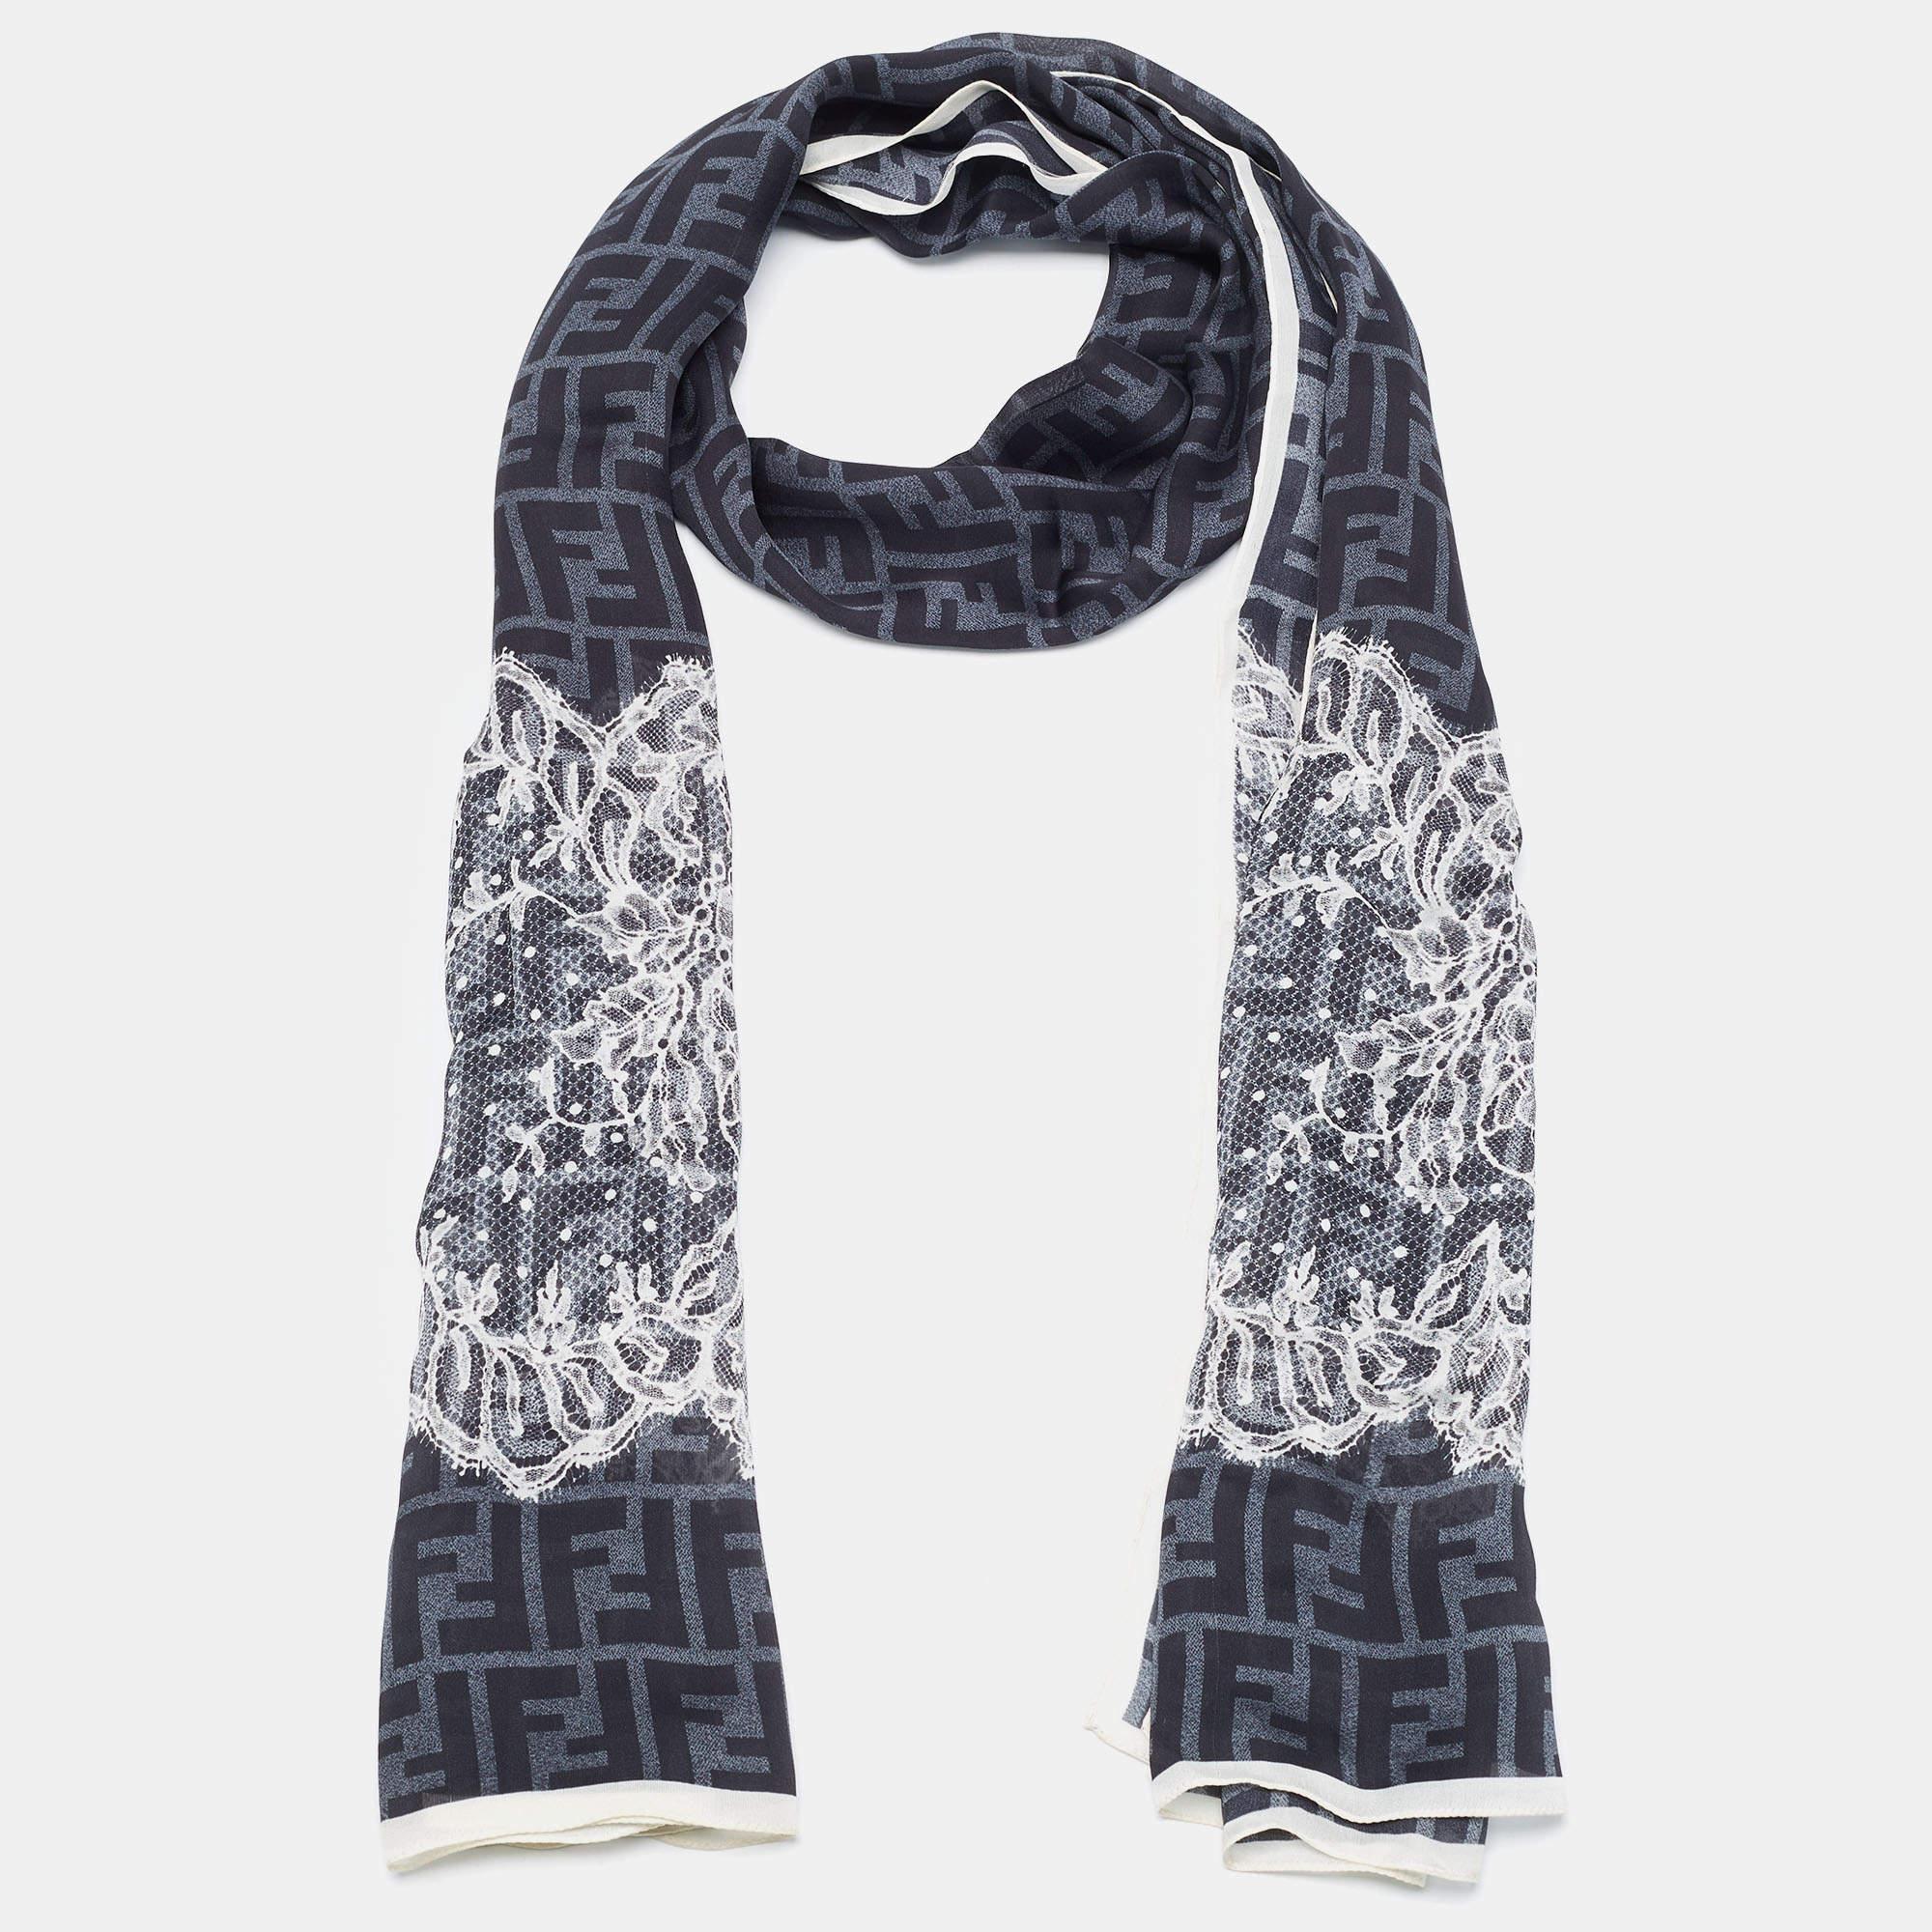 Pick this Fendi scarf for an instantly chic update. The scarf is made from silk and cut to a length that allows you to comfortably wrap it around your neck. The design involves prints and neatly hemmed edges.

